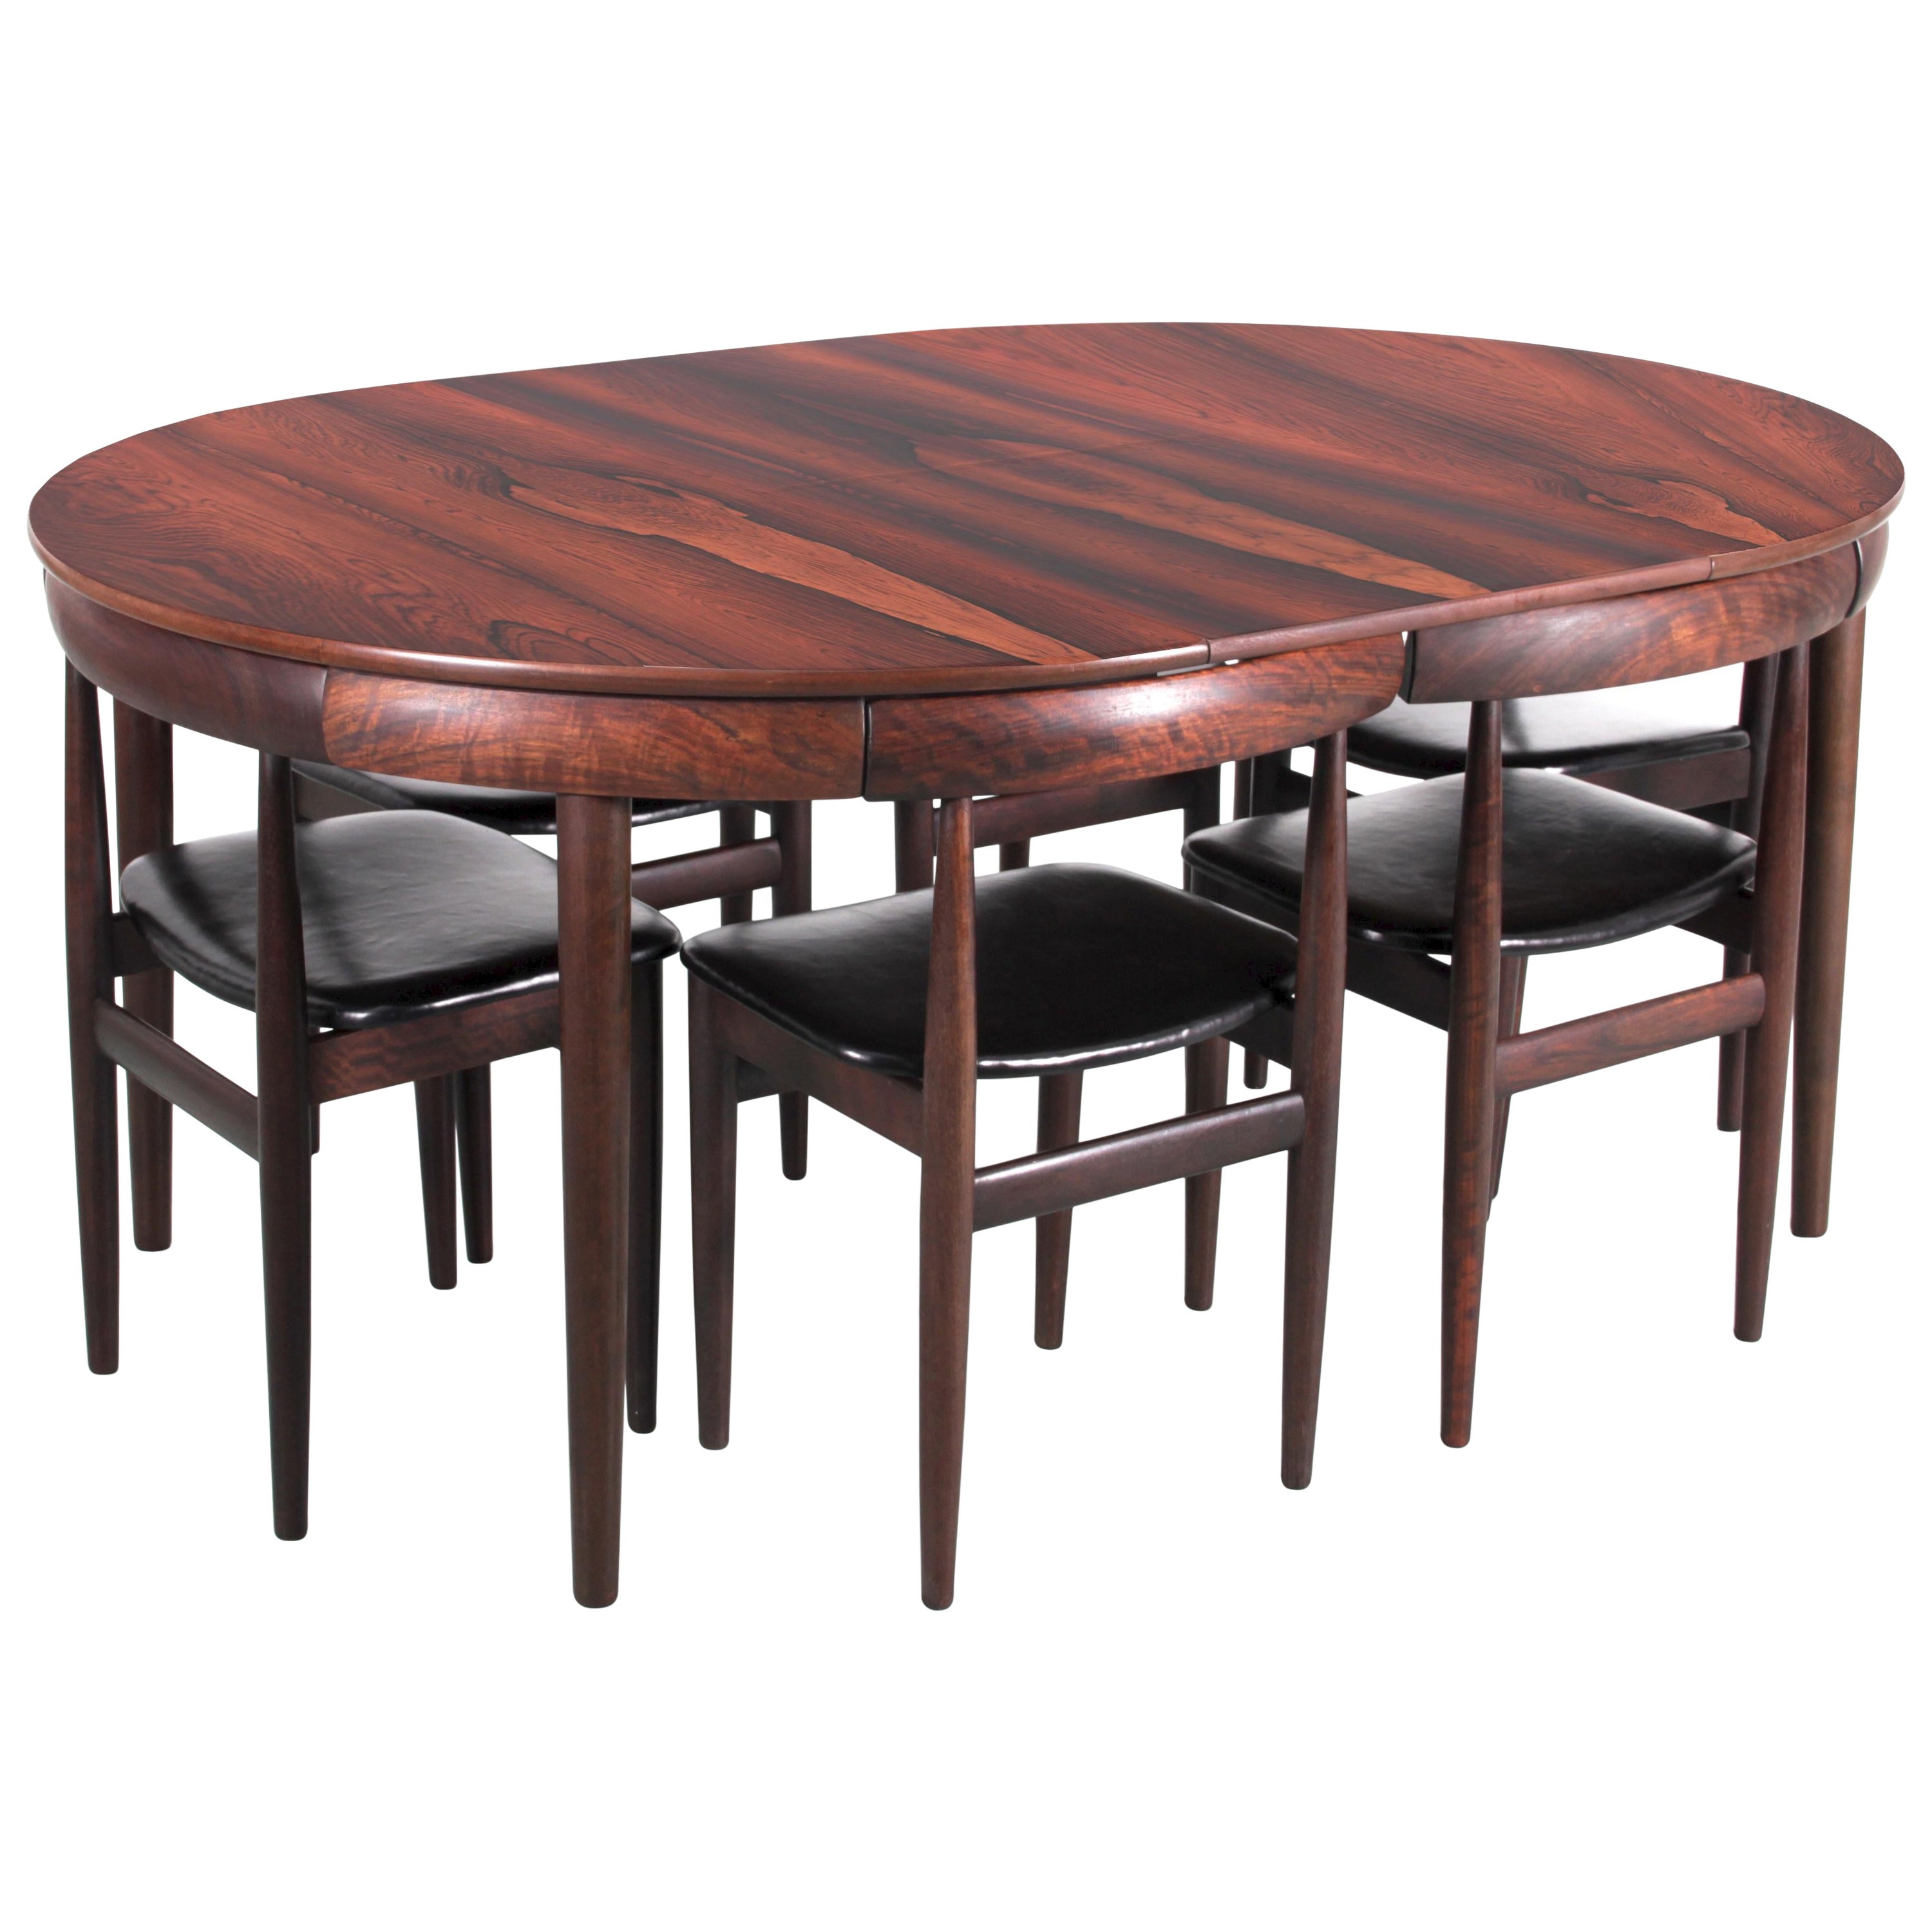 Mid-Century Modern Scandinavian Dining Set in Rosewood by Olsen with 6 Chairs